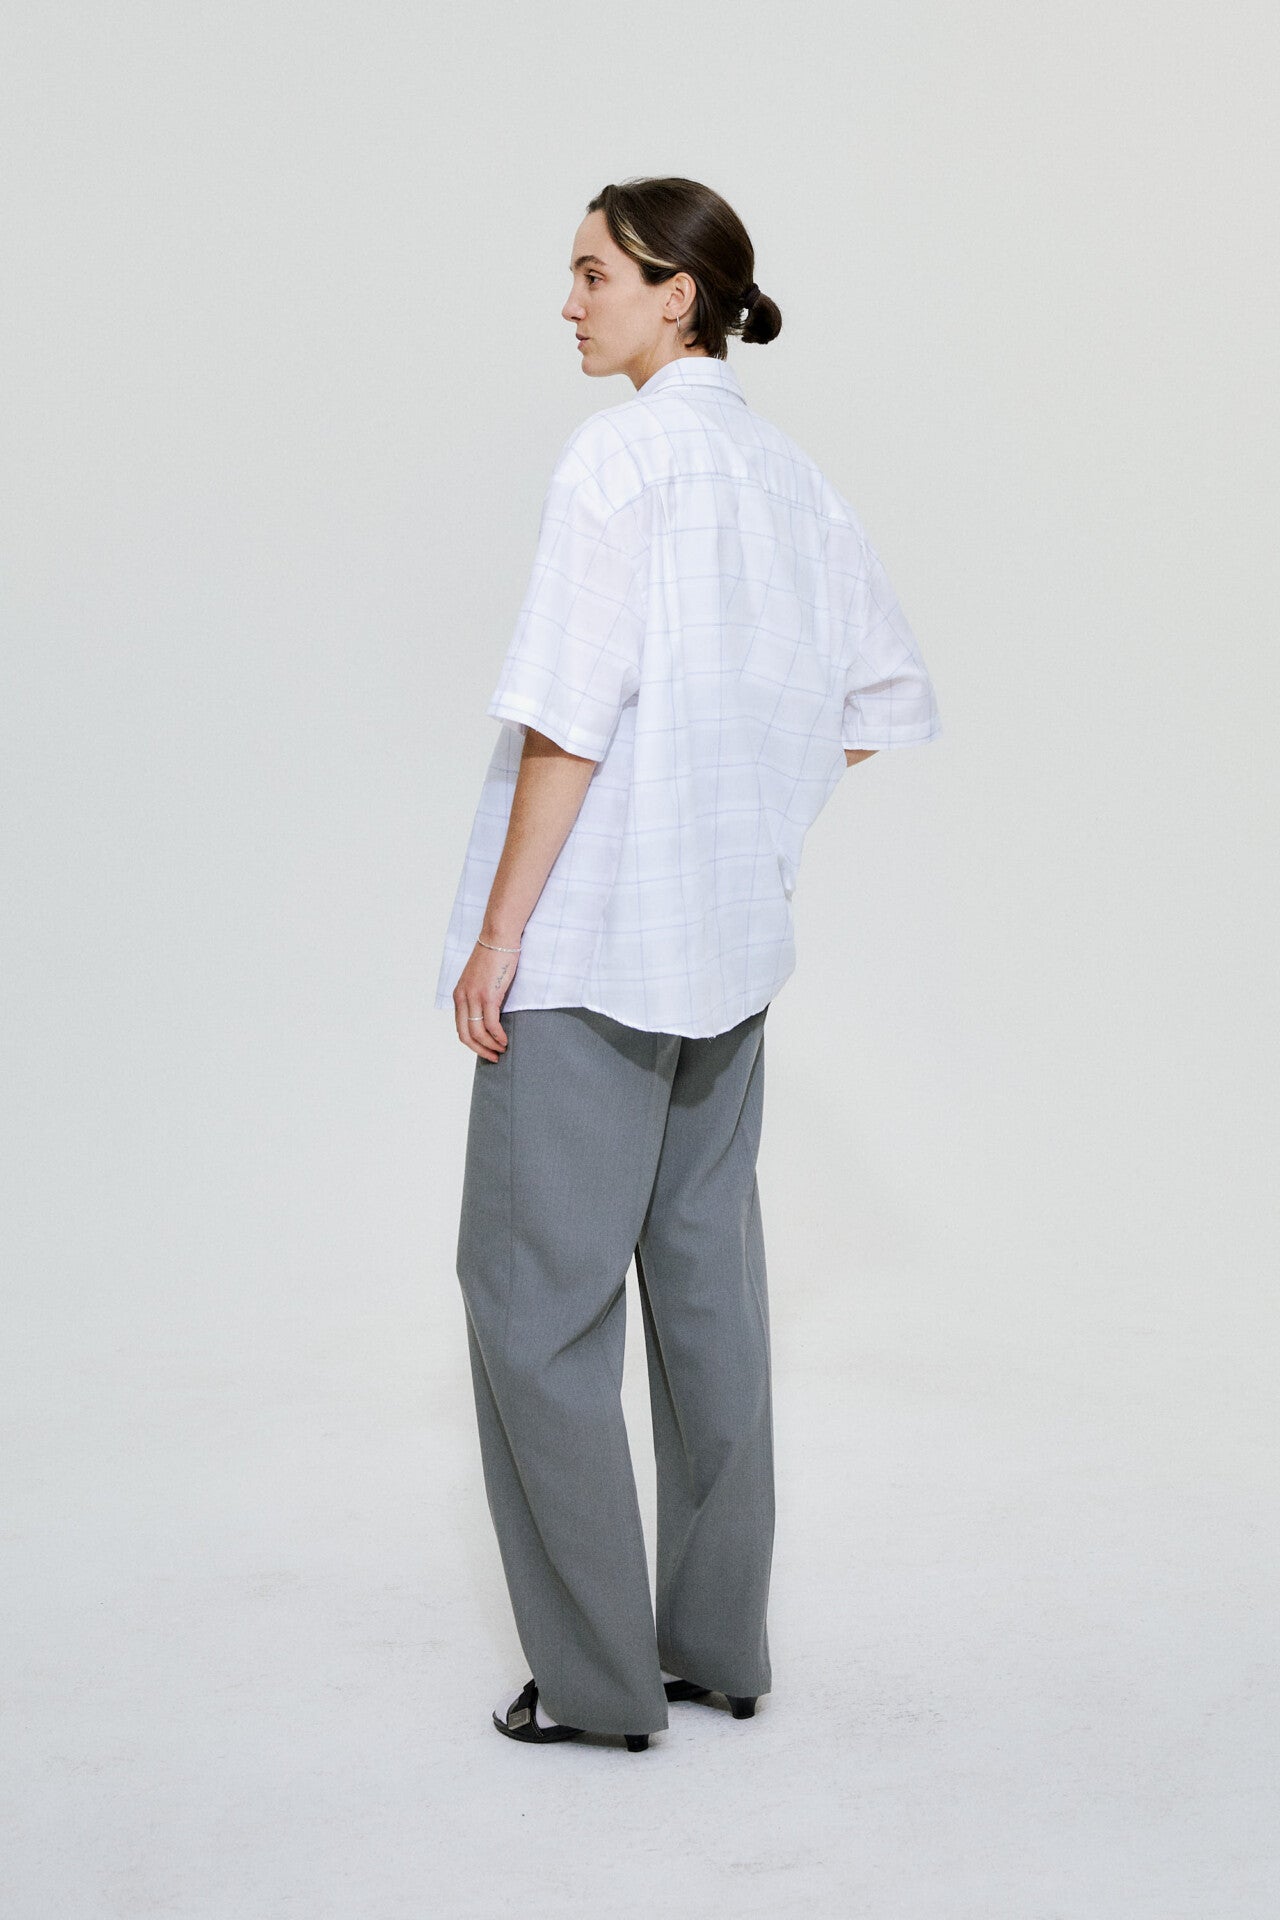 Ode shirt in check by goutez